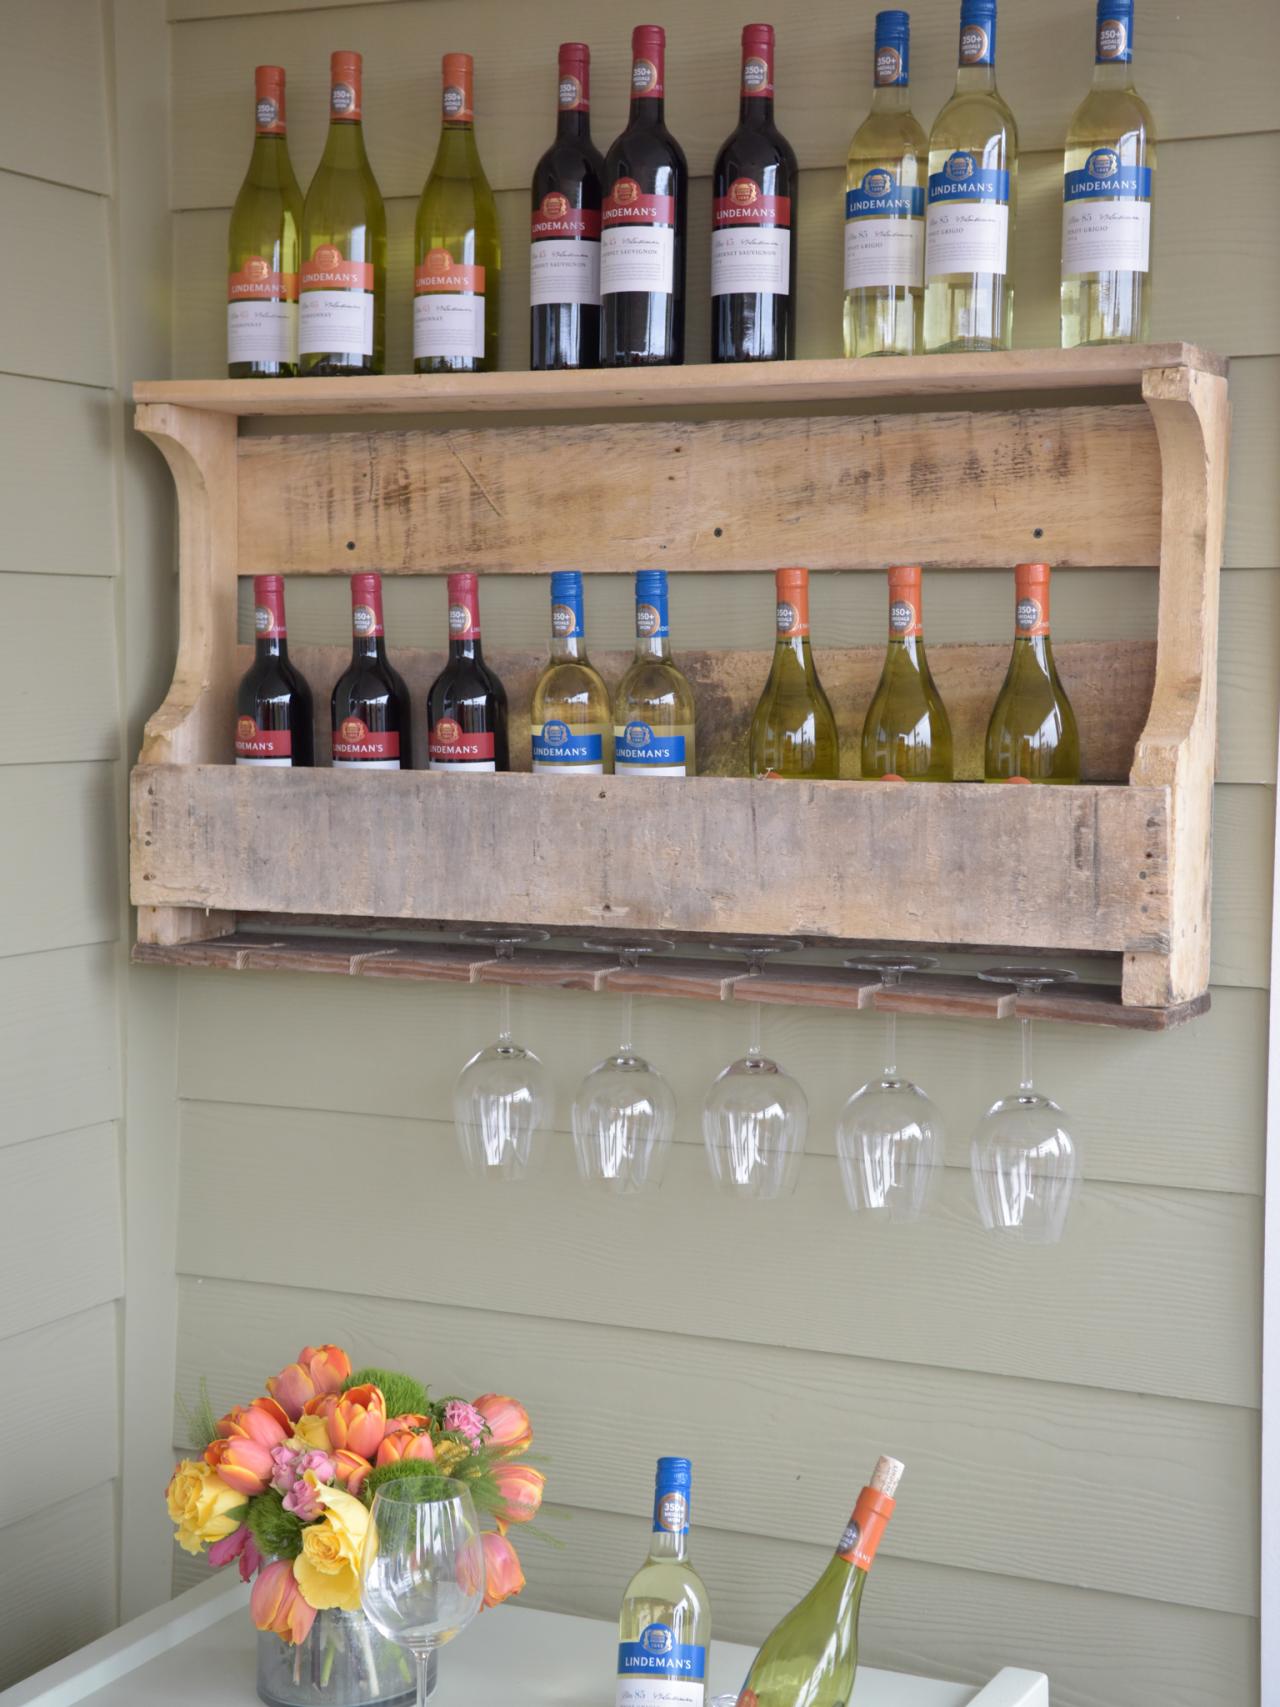 How to Make a Wine Rack From a Wood Pallet